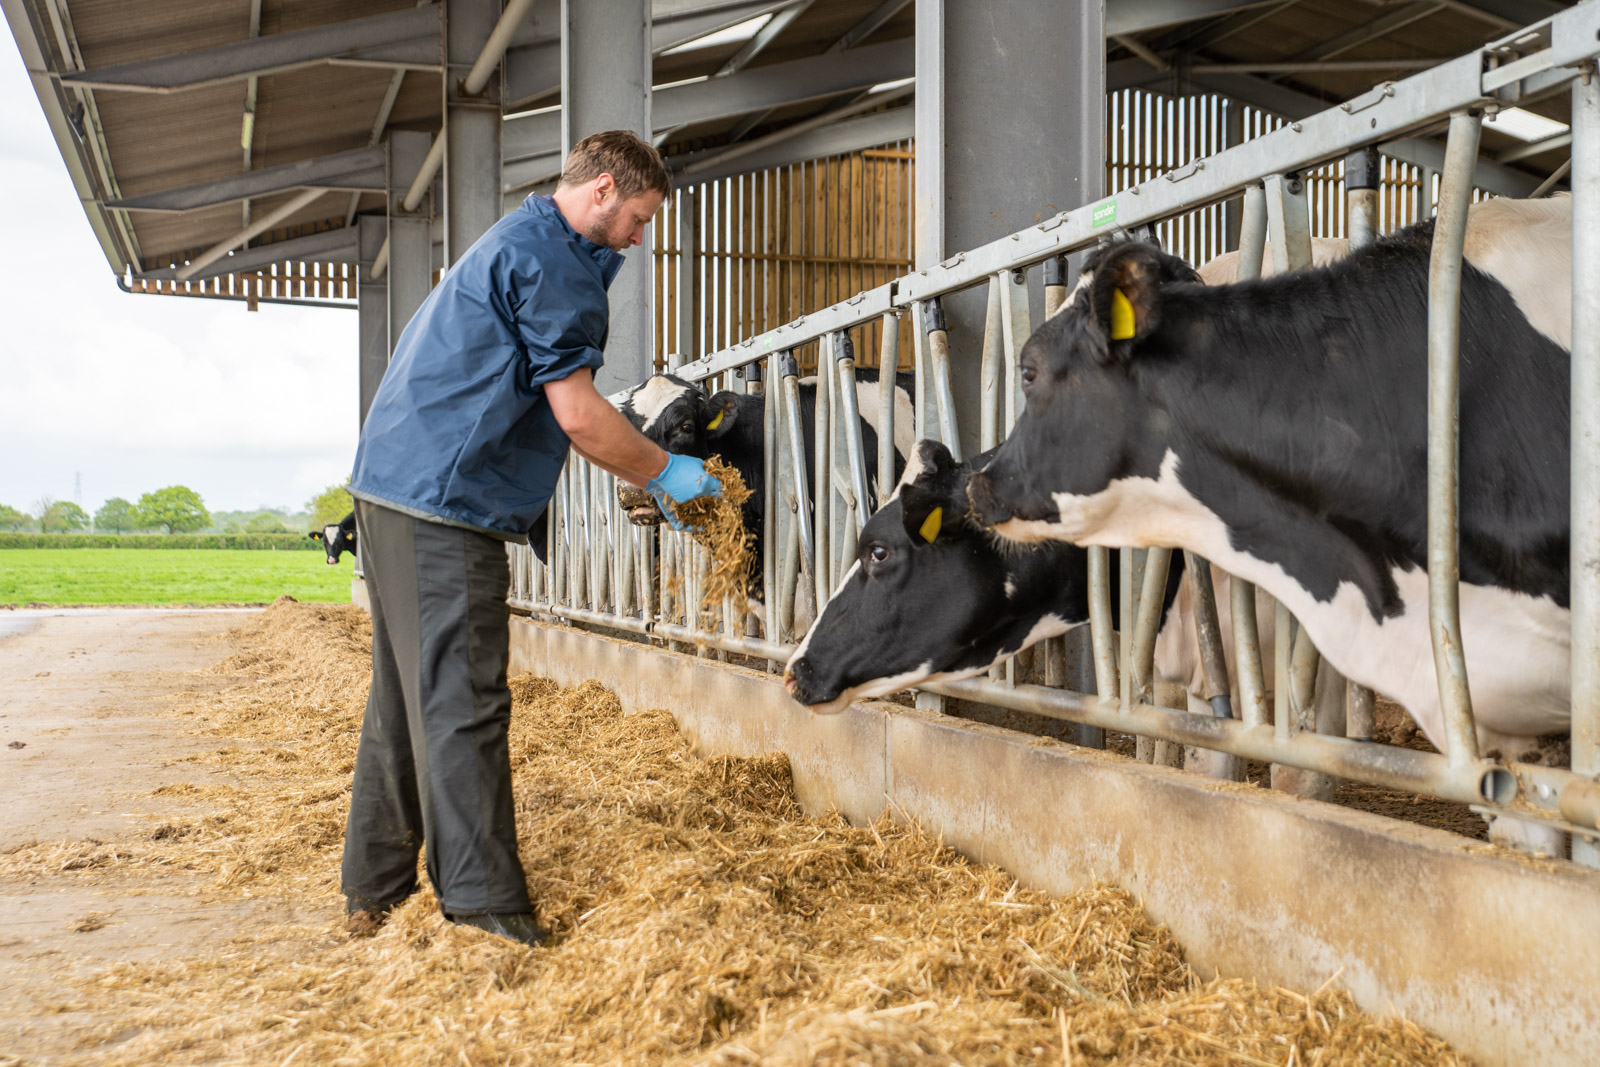 VetPartners farm vets lobby for greater support for UK dairy farmers